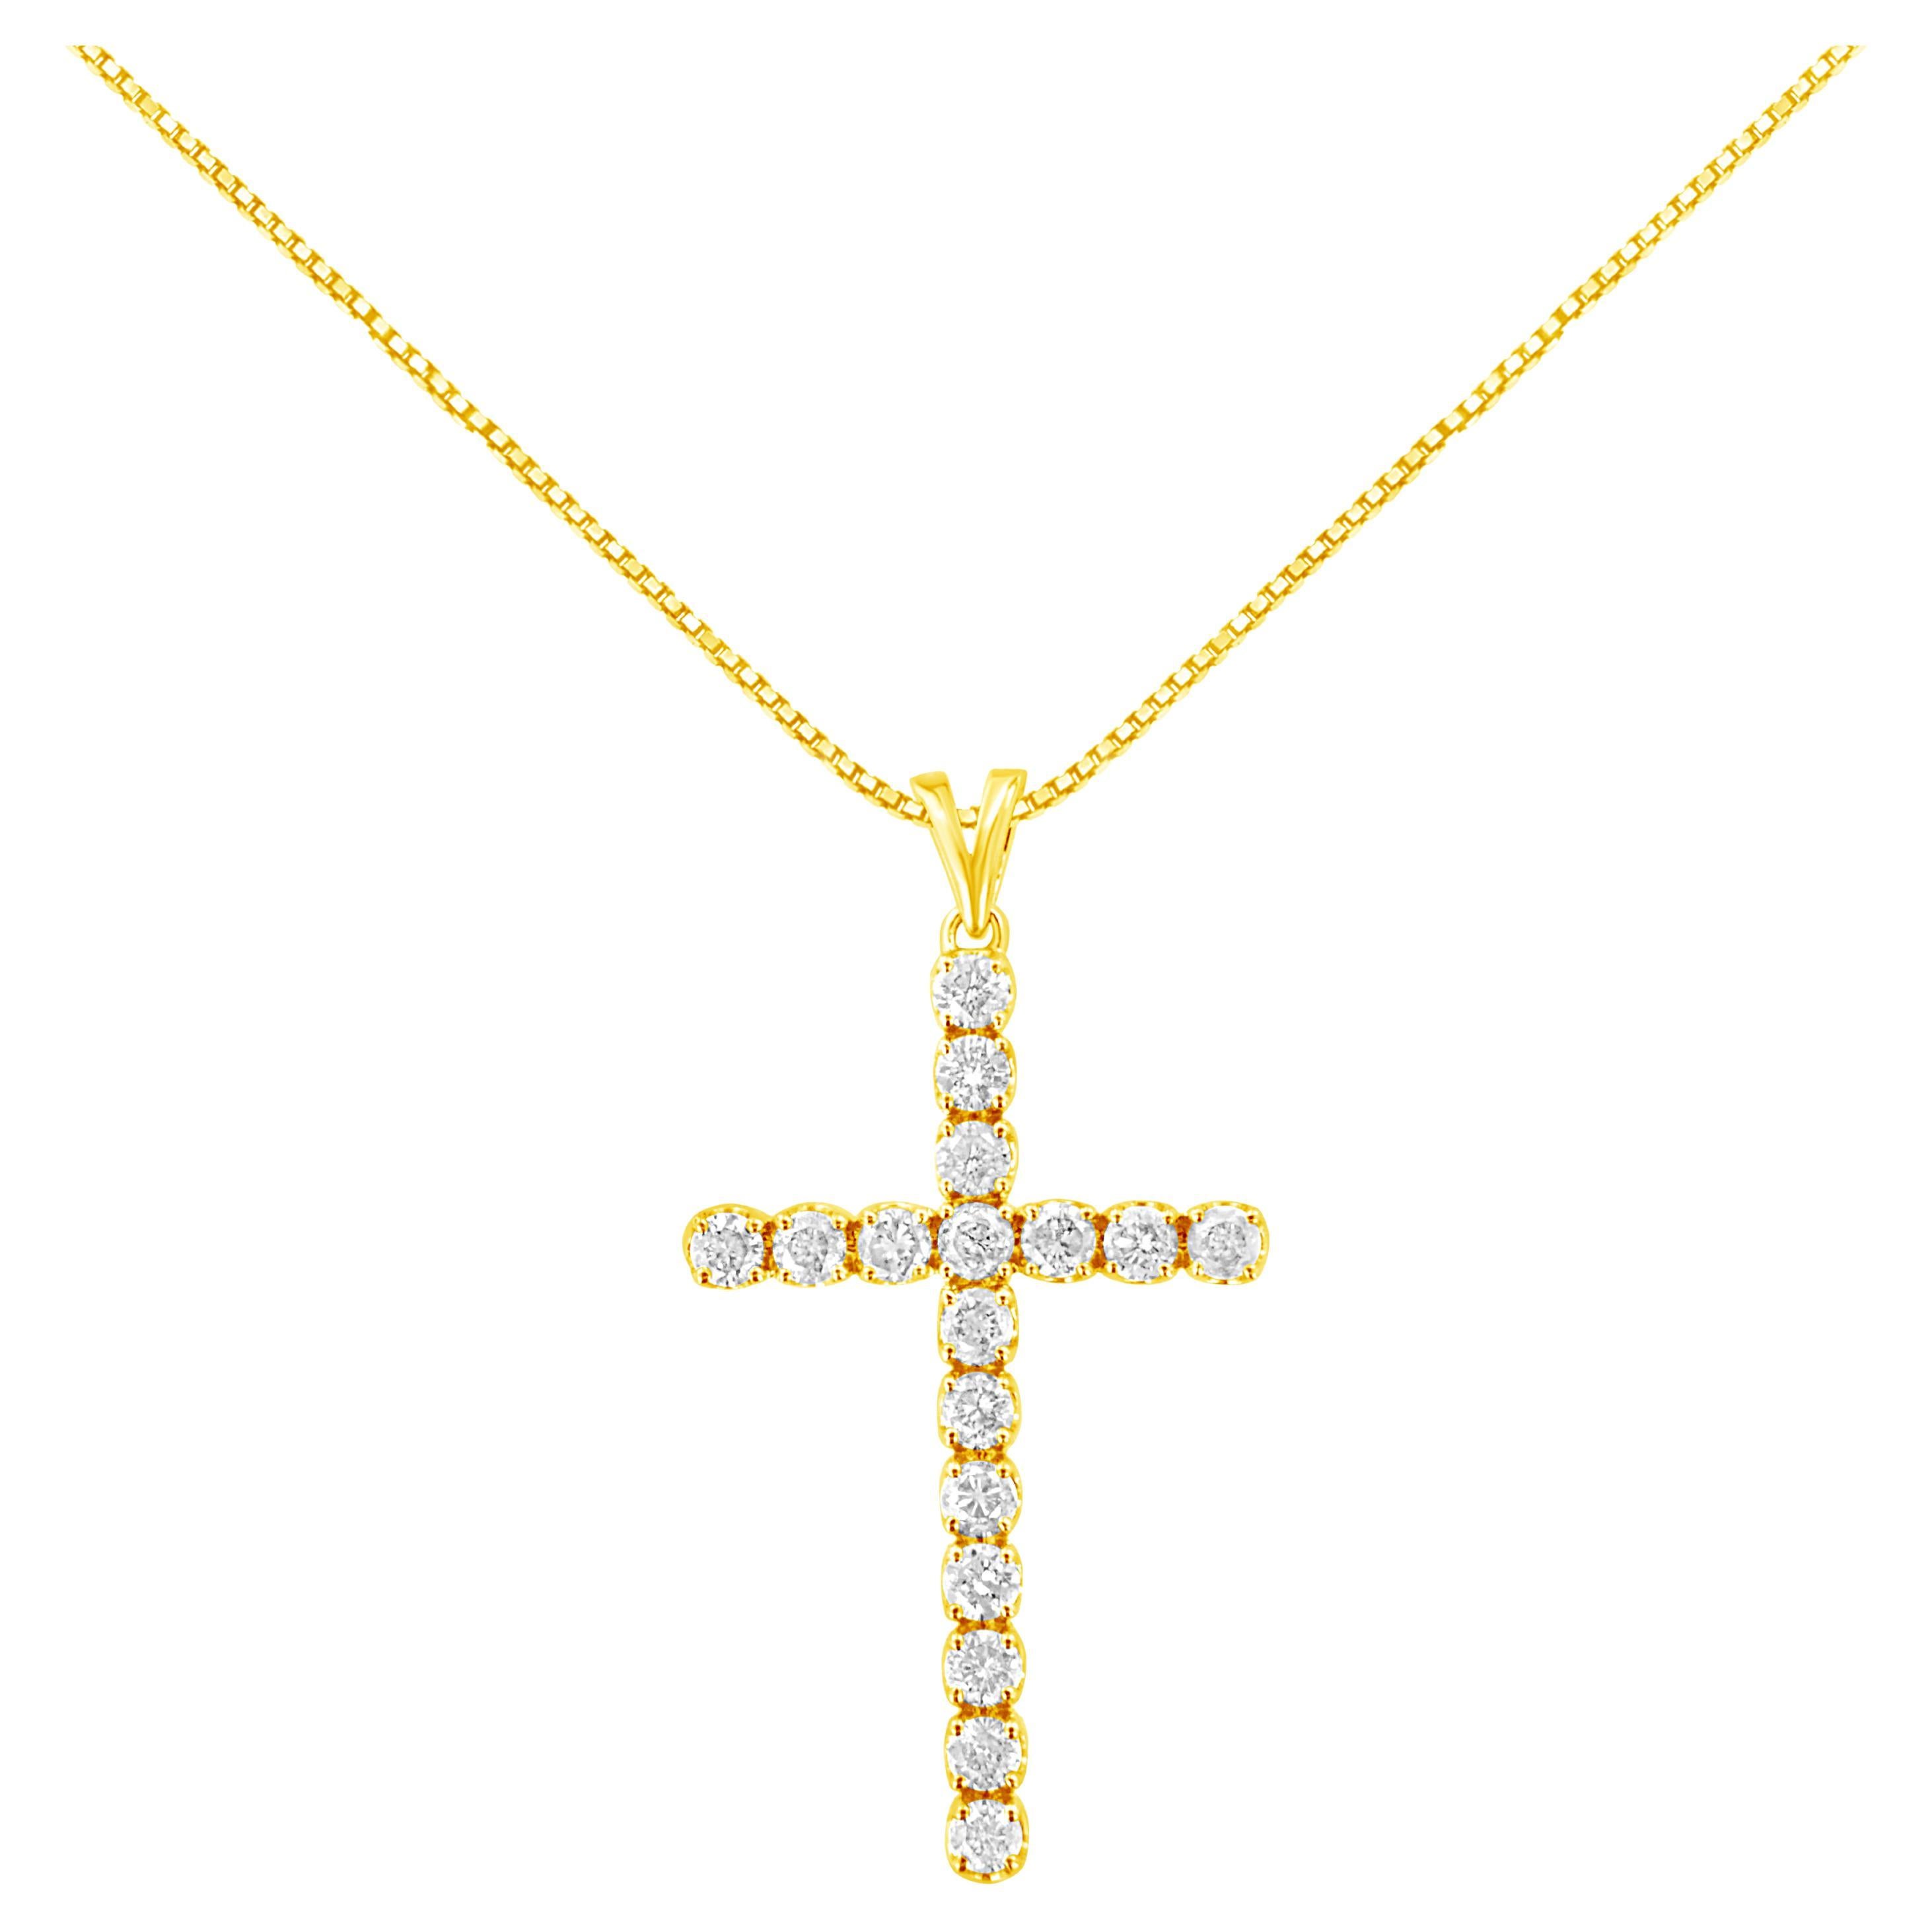 Yellow Gold Plated Sterling Silver 2.0 Carat Diamond Cross Pendant Necklace For Sale